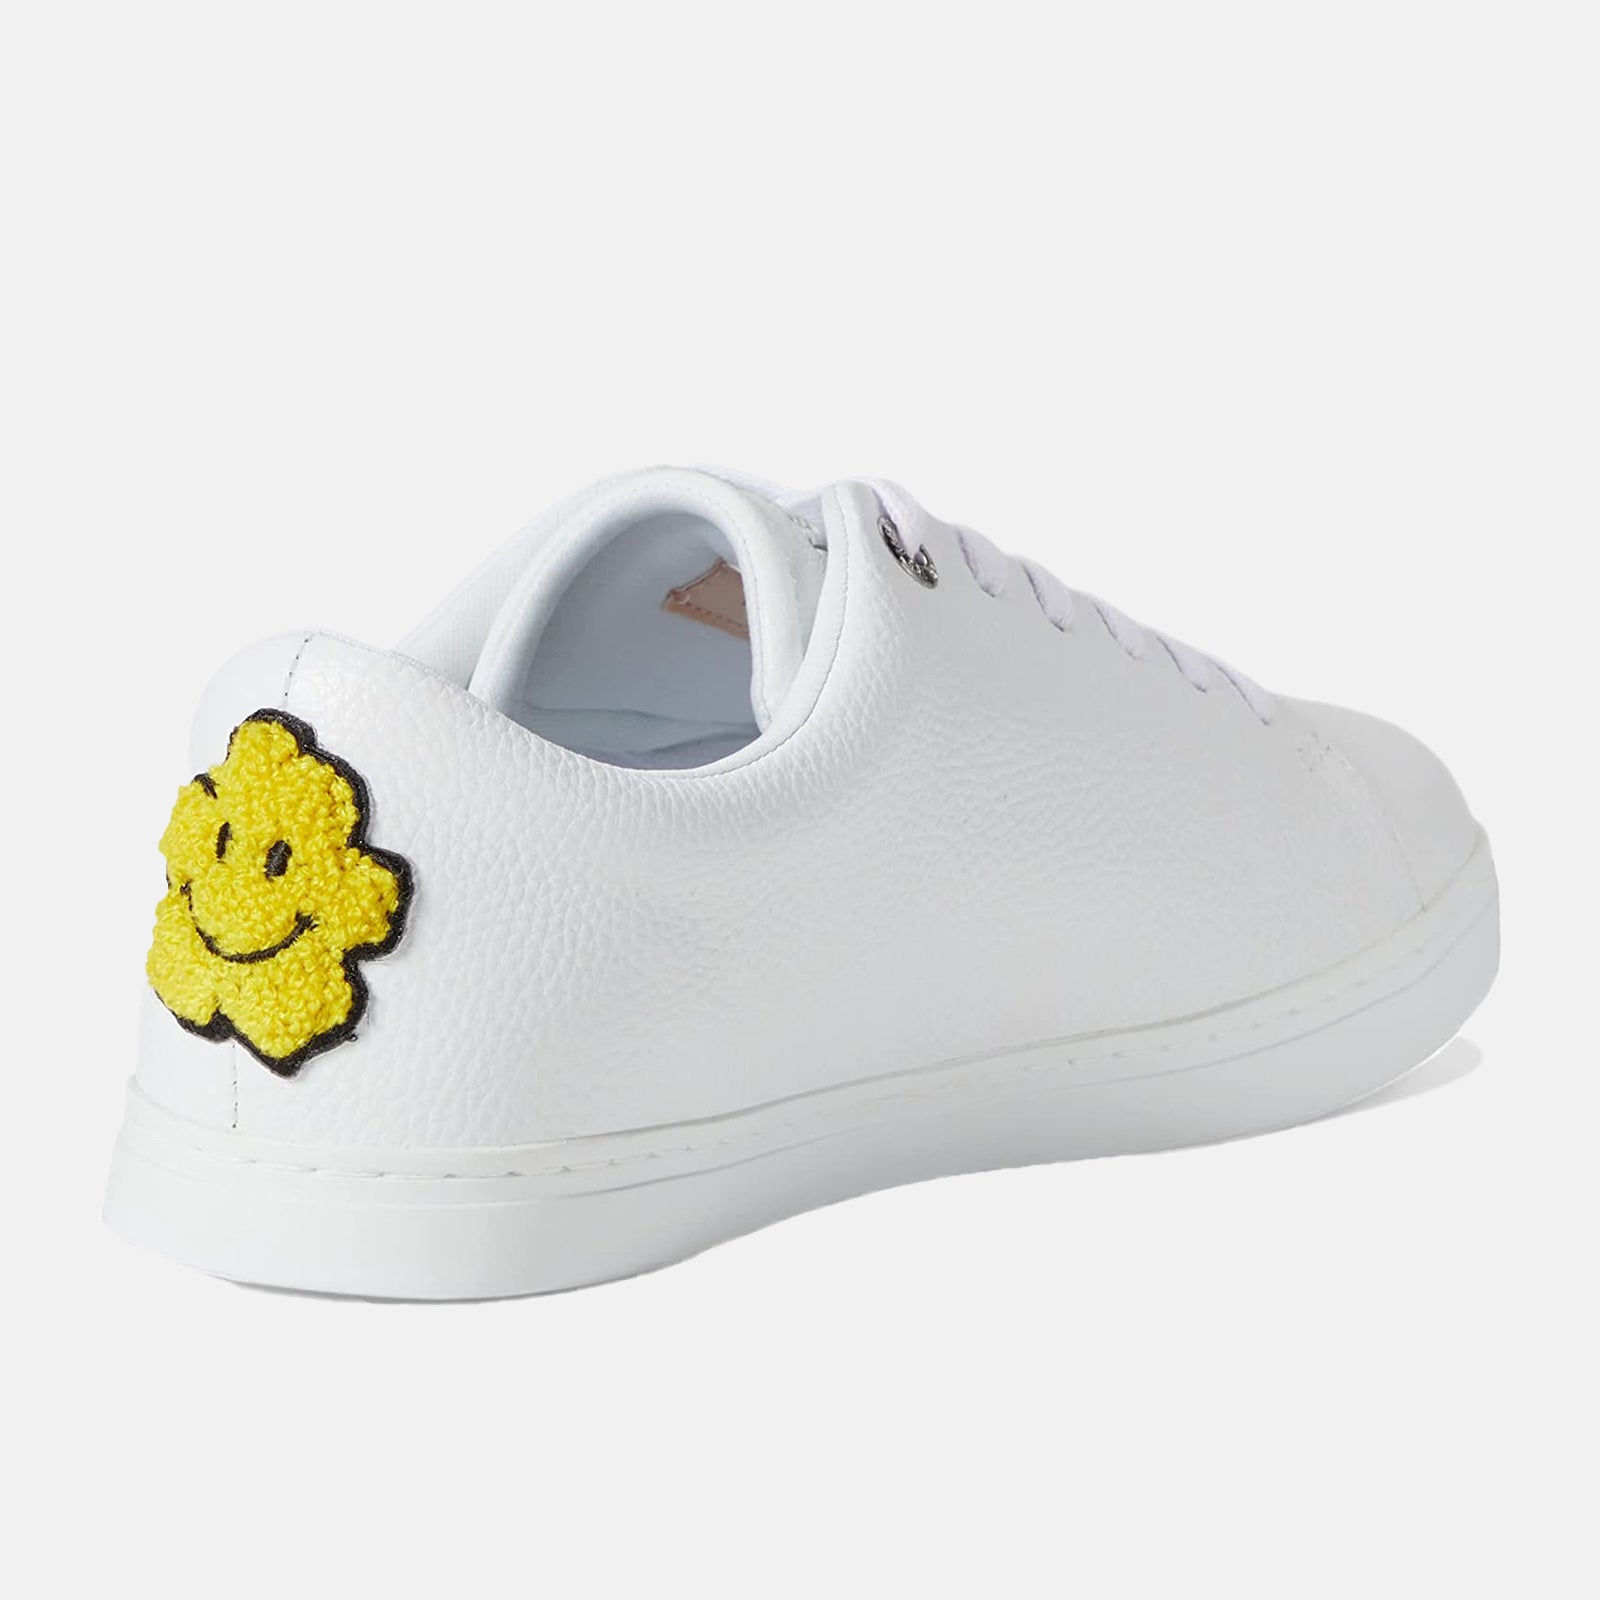 TED BAKER MAYKAY Sneakers in White 266926 WHITE FROM EIGHTYWINGOLD - OFFICIAL BRAND PARTNER